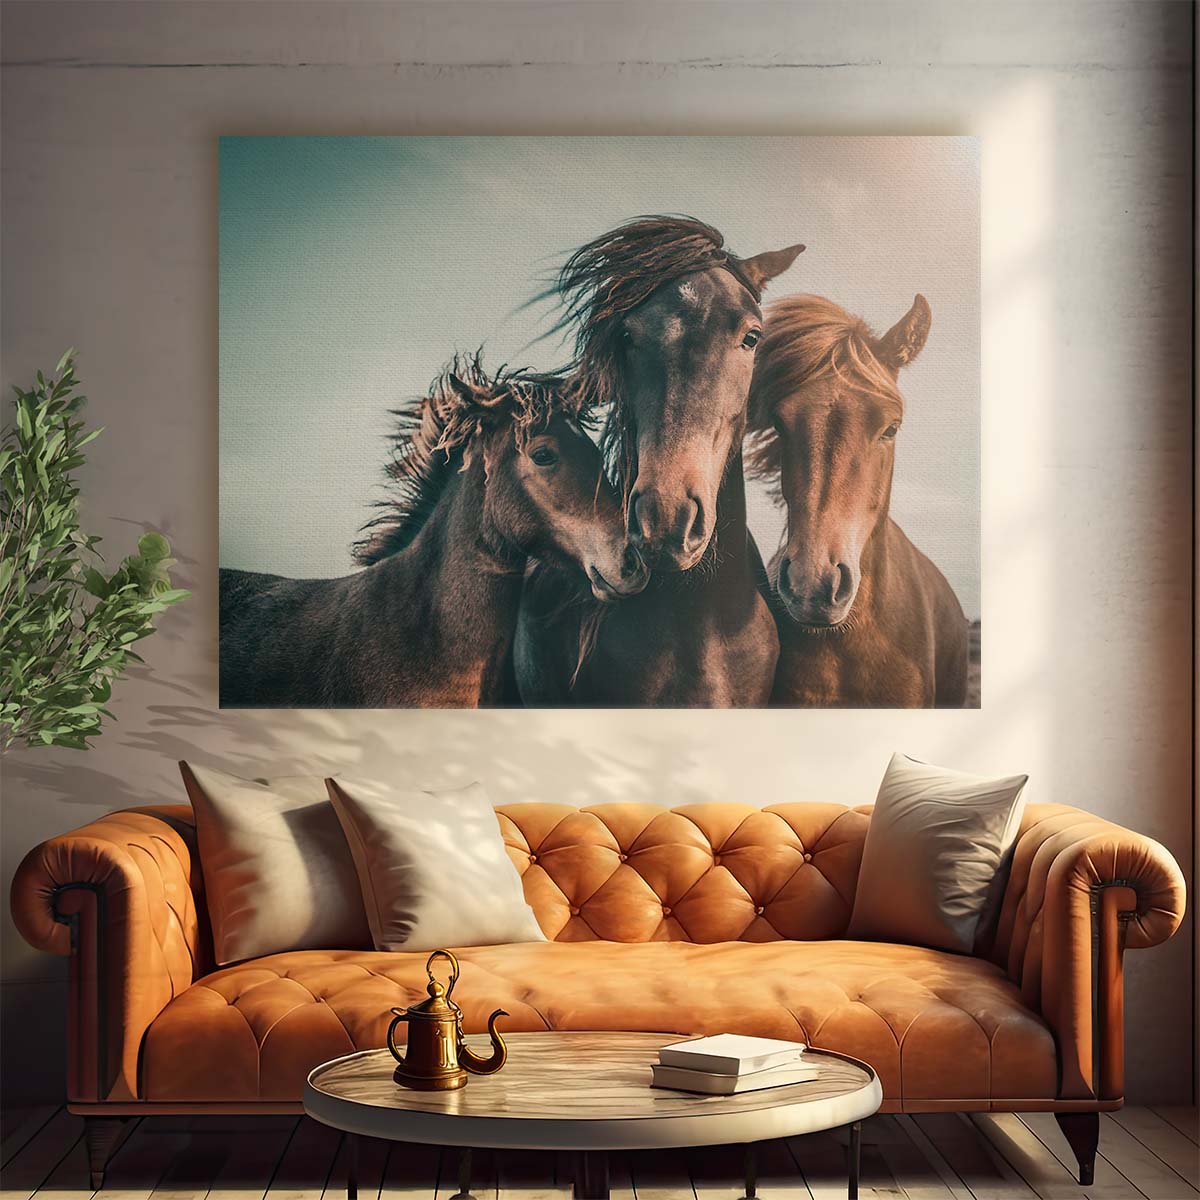 Icelandic Horse Family Sunset Seascape Wall Art by Luxuriance Designs. Made in USA.